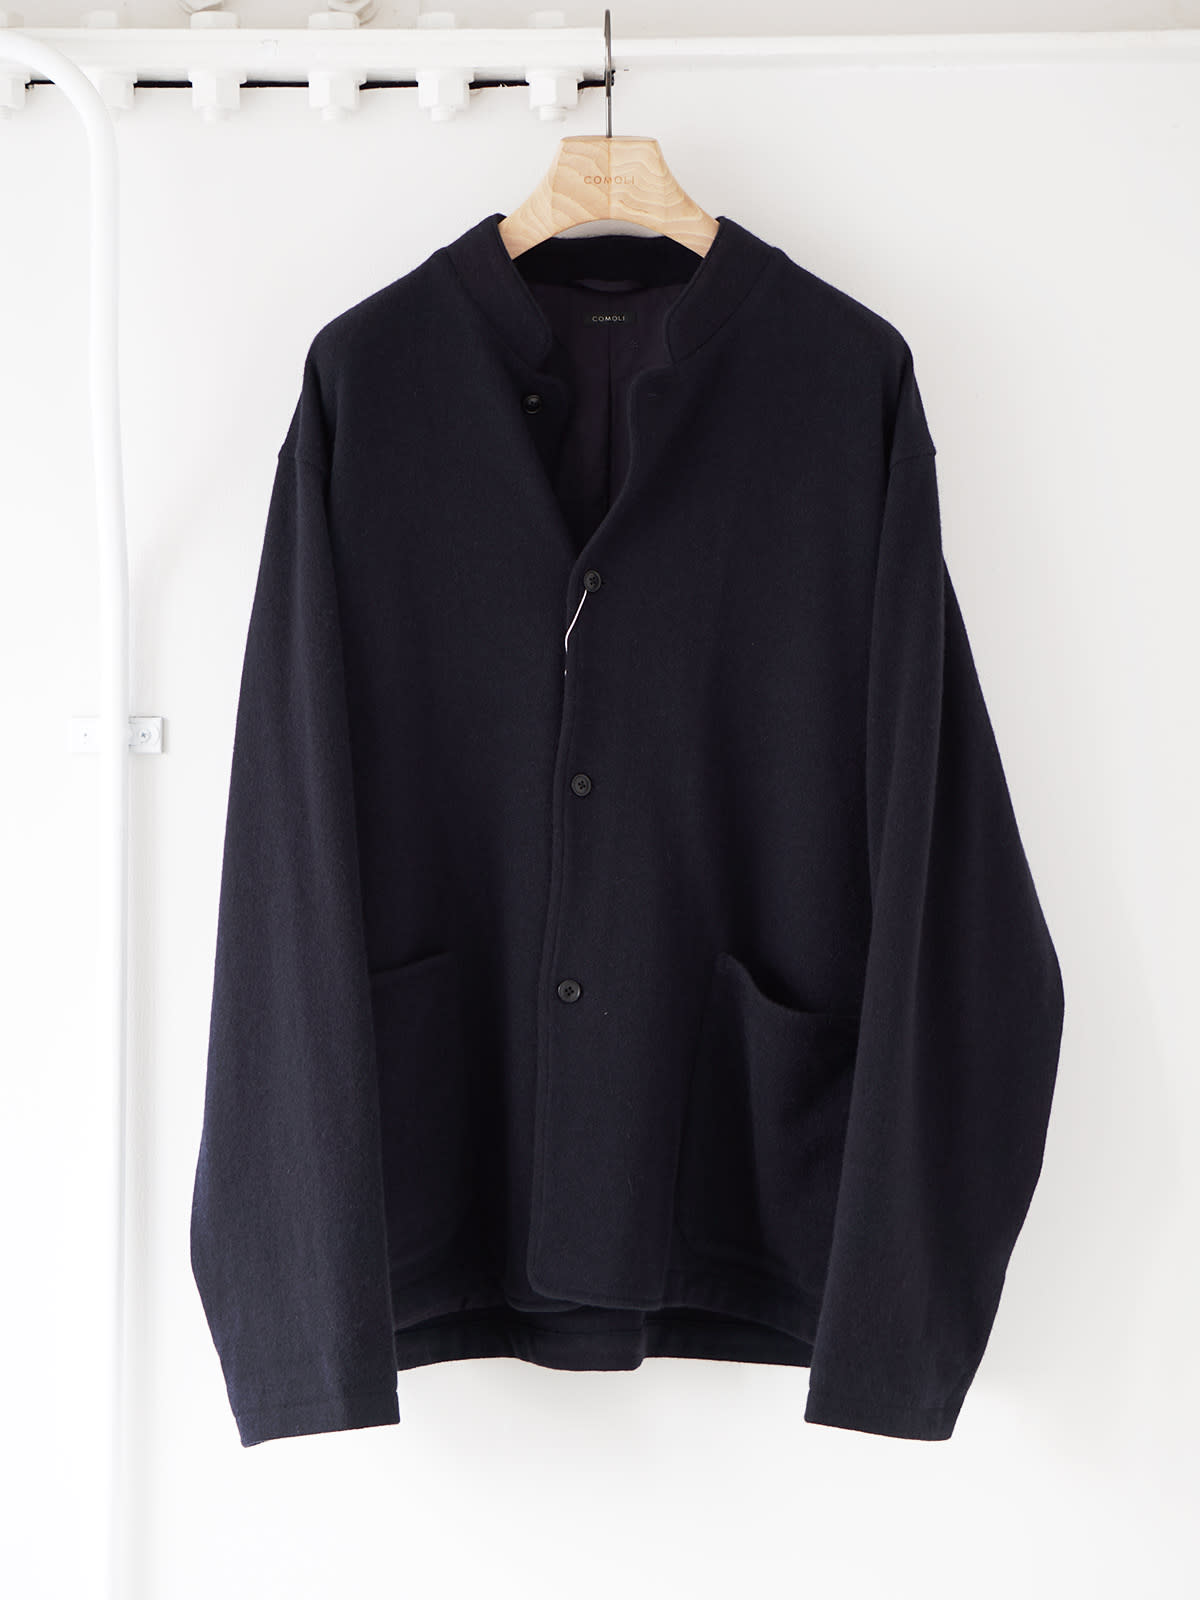 cashmere stand collar knit jacket y1